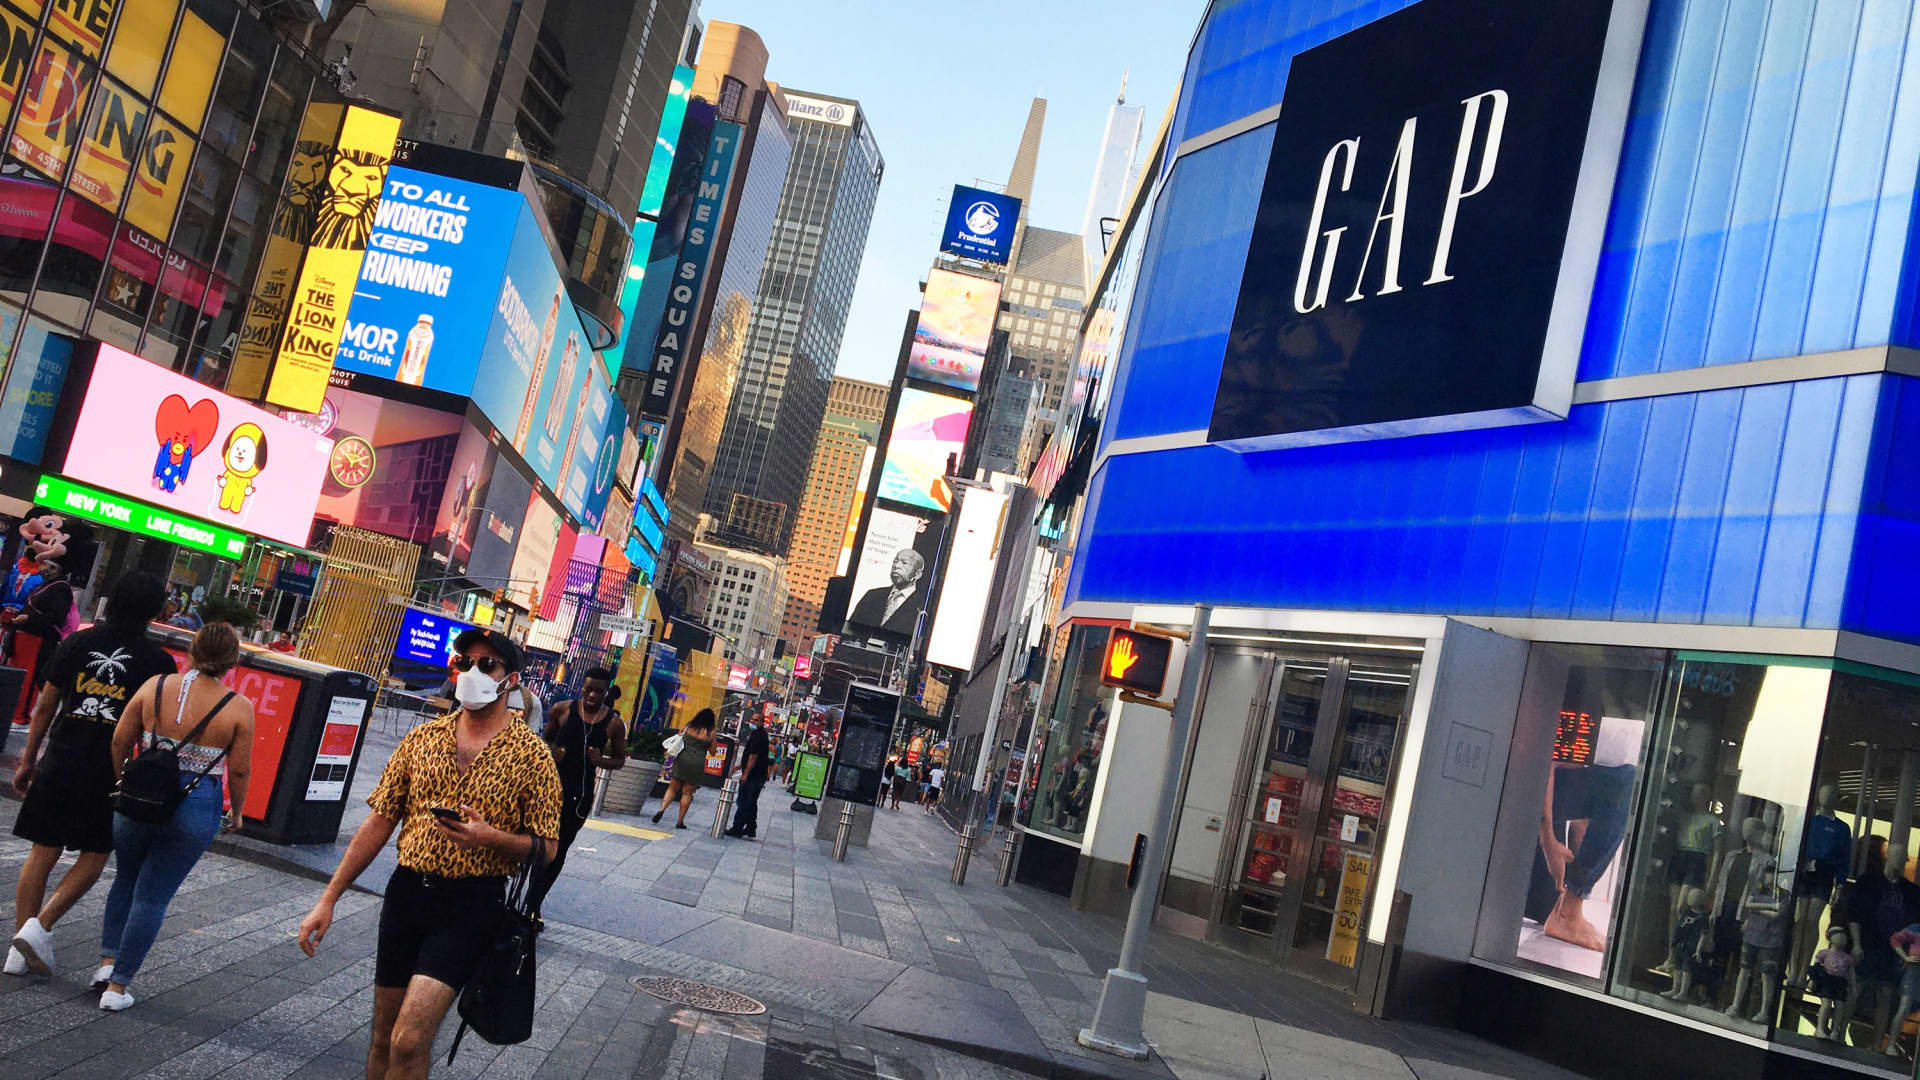 A Gap store in New York, August 2, 2020.